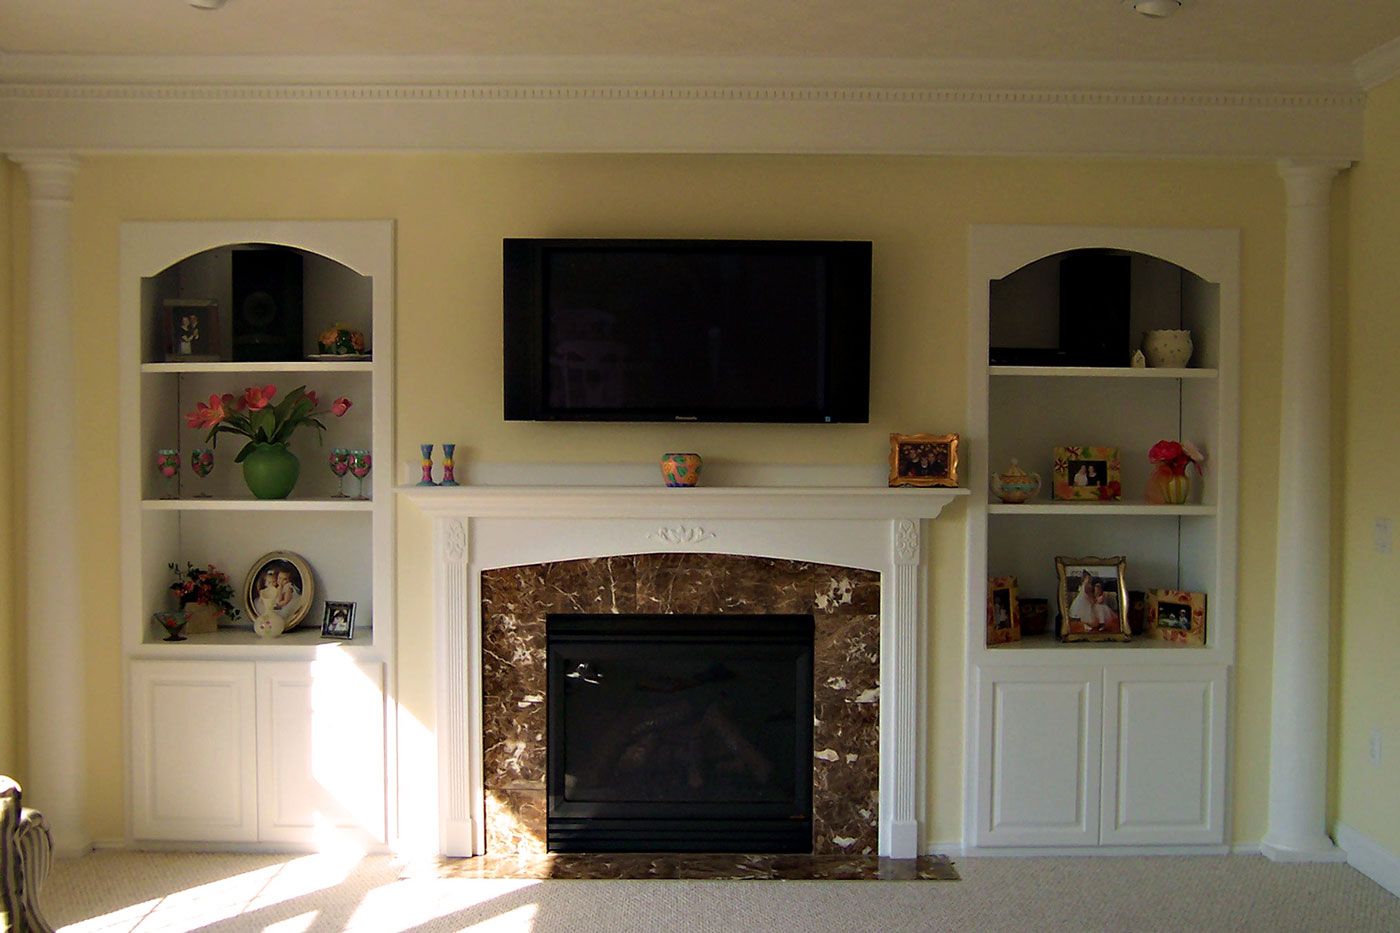 Built-in Shelving & Fireplace Mantel- Craftworks Custom Cabinetry